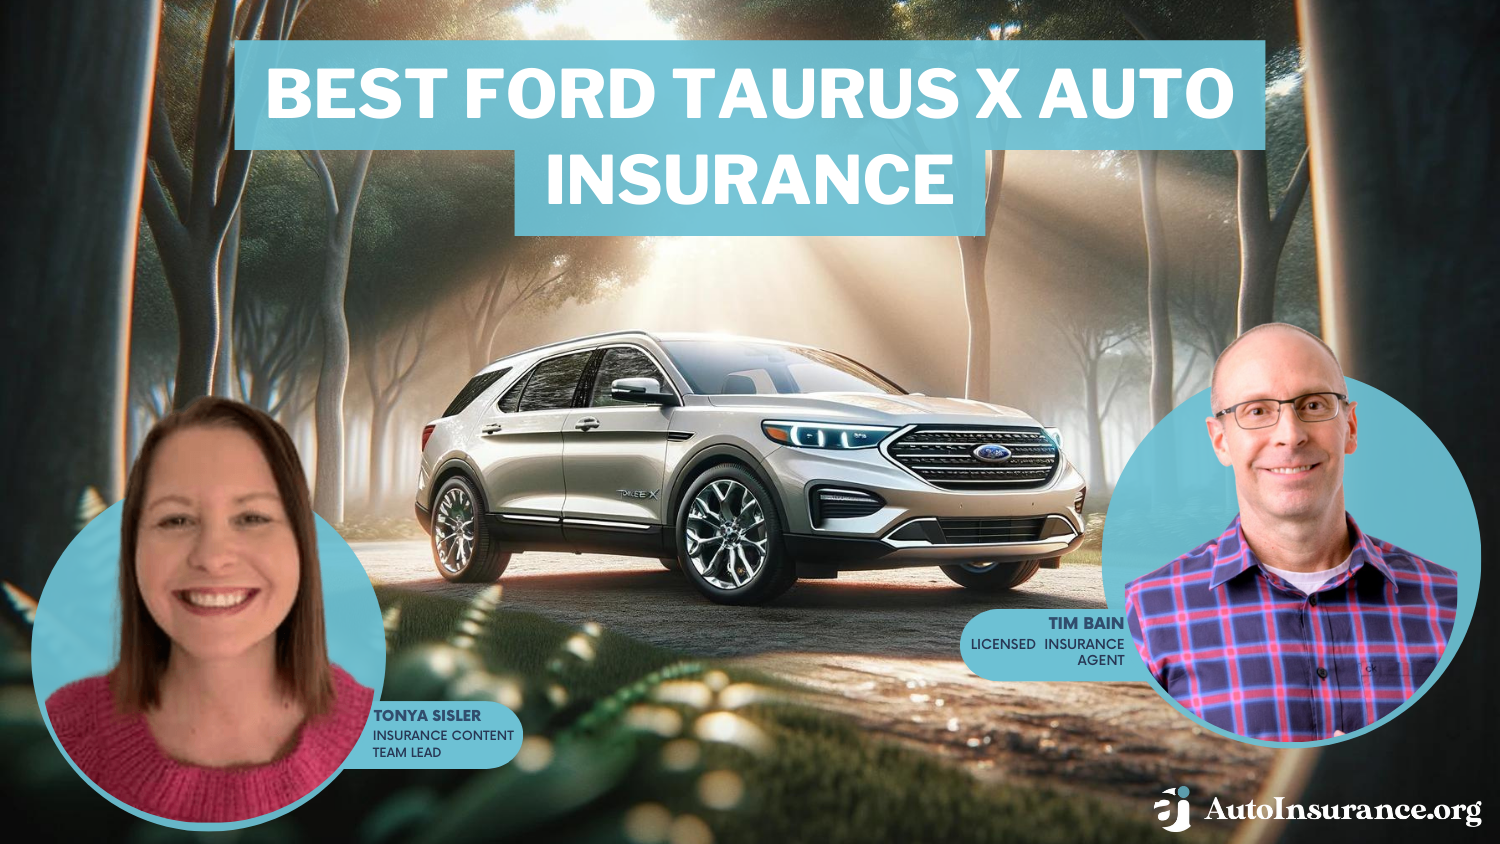 Best Ford Taurus X Auto Insurance: Chubb, AAA, and Amica